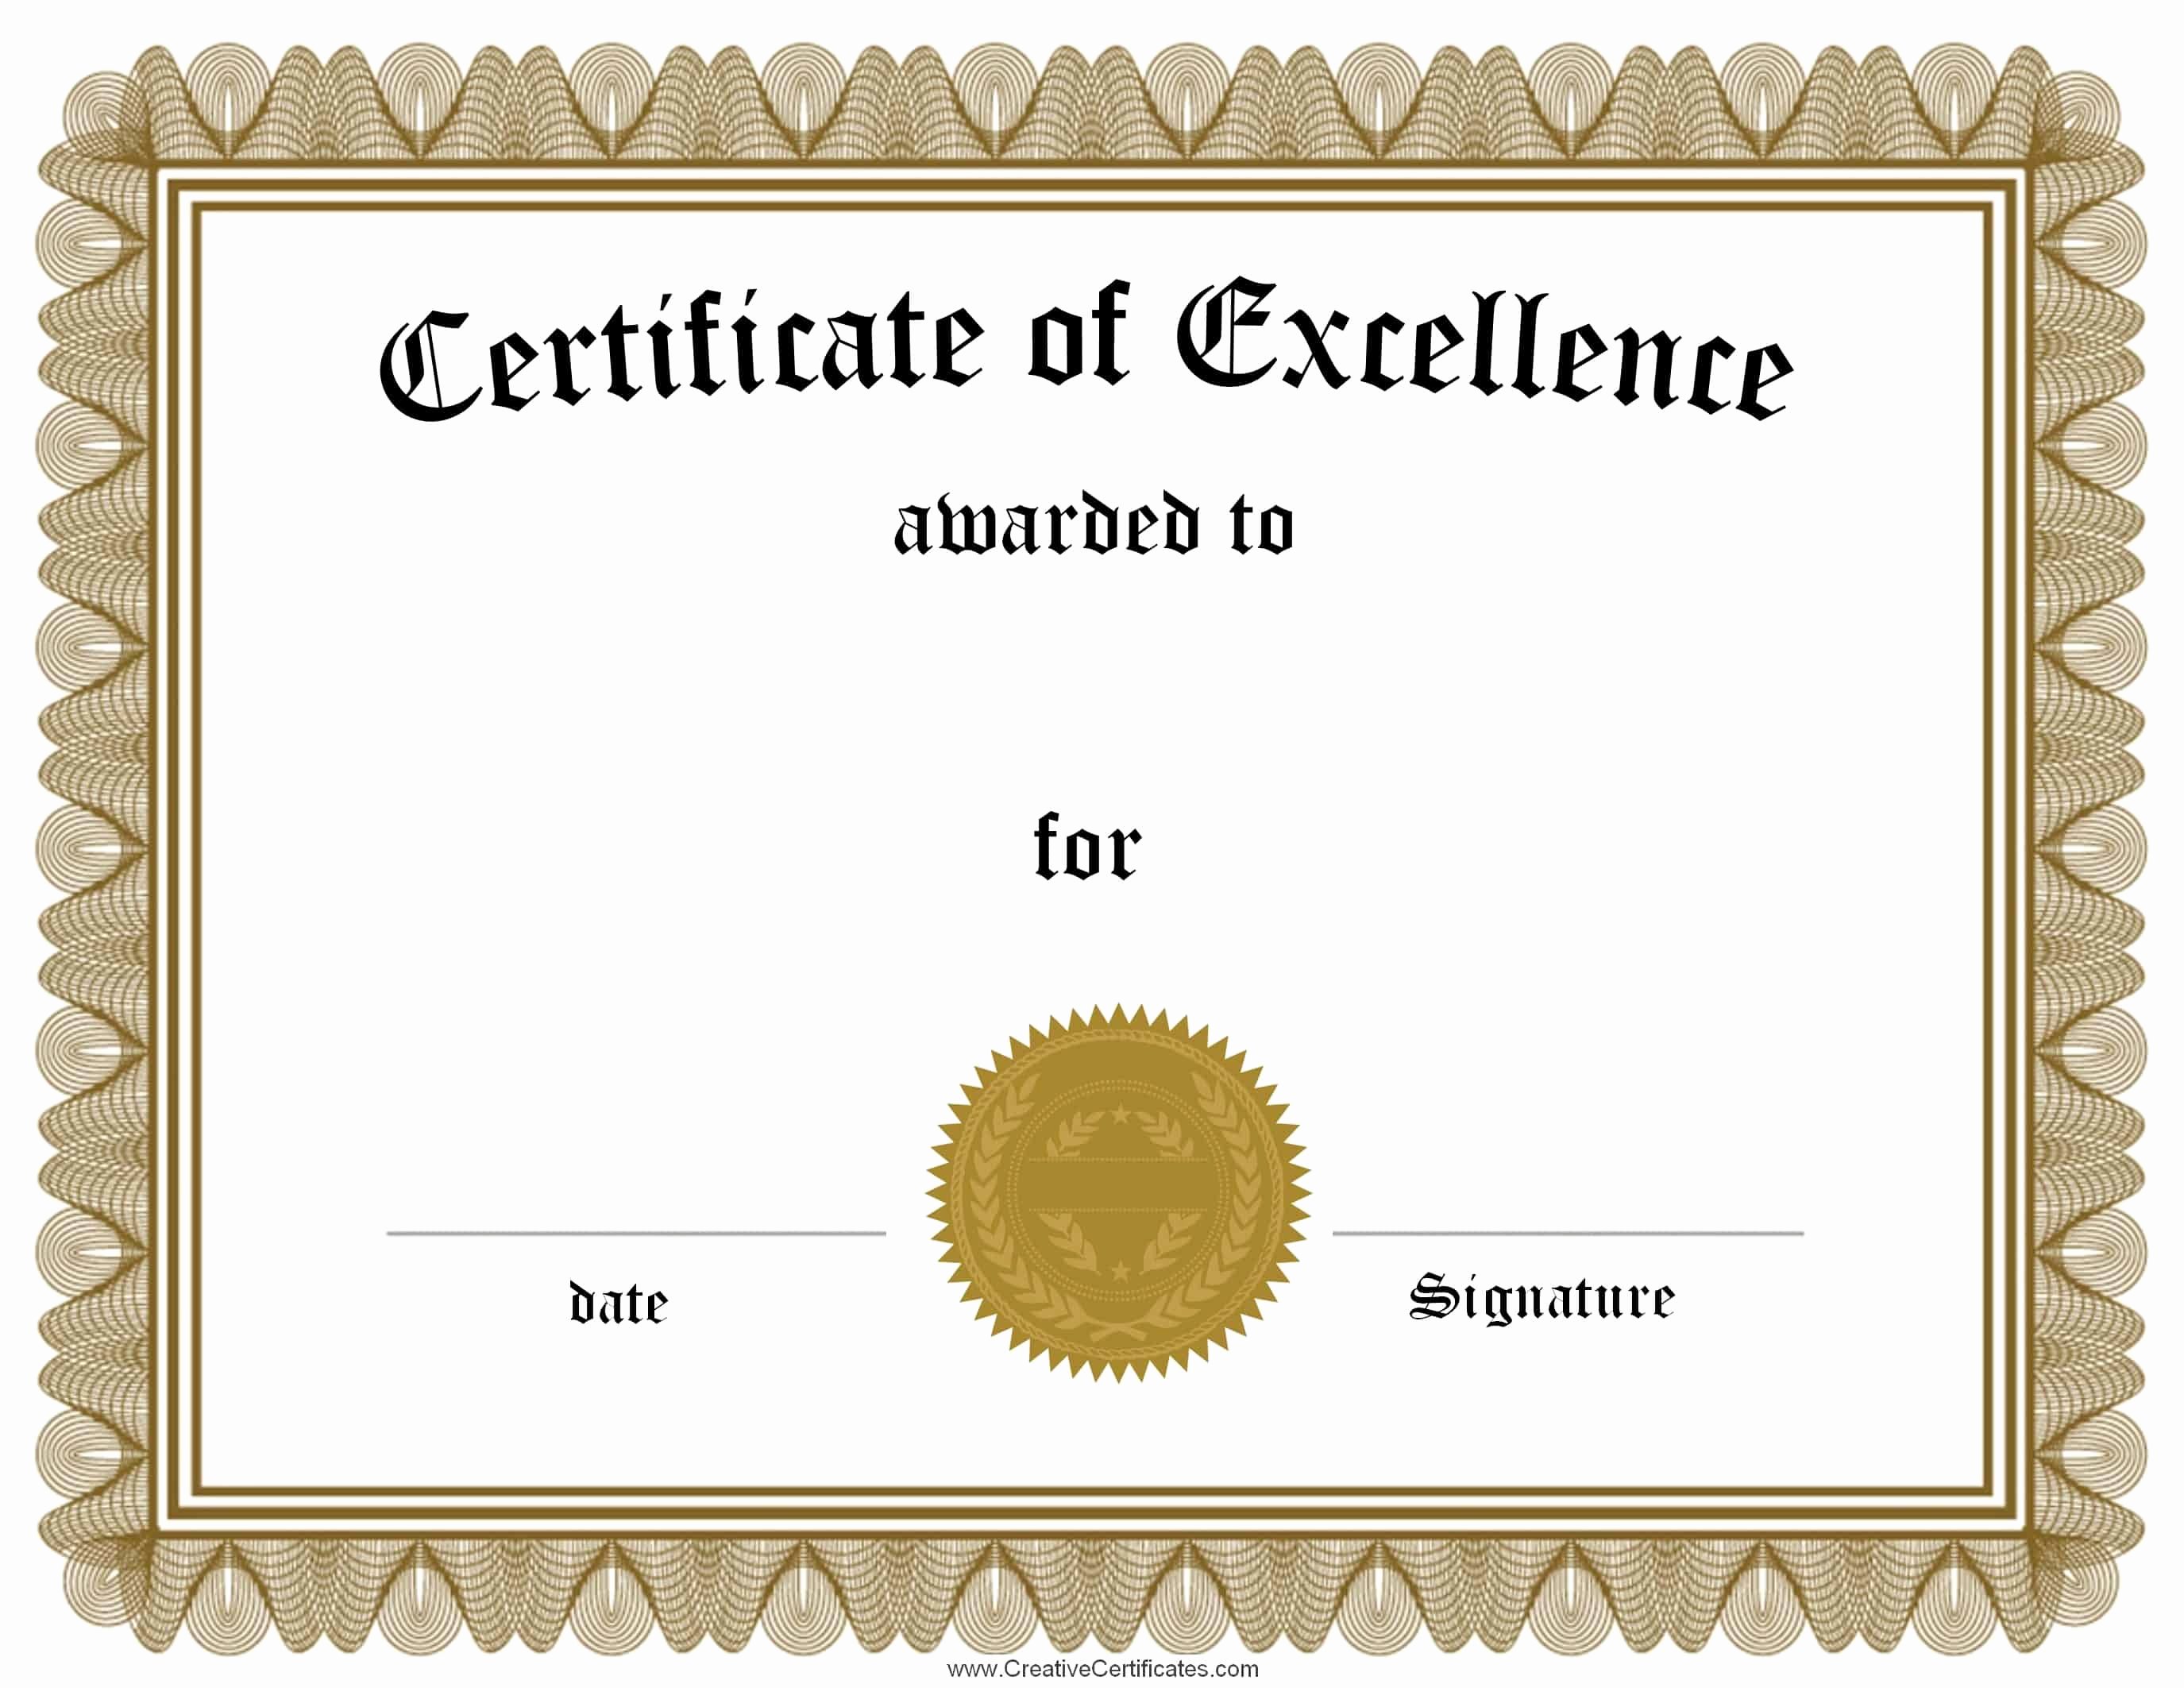 Certificate Of Excellence Template Awesome Free Customizable Certificate Of Achievement